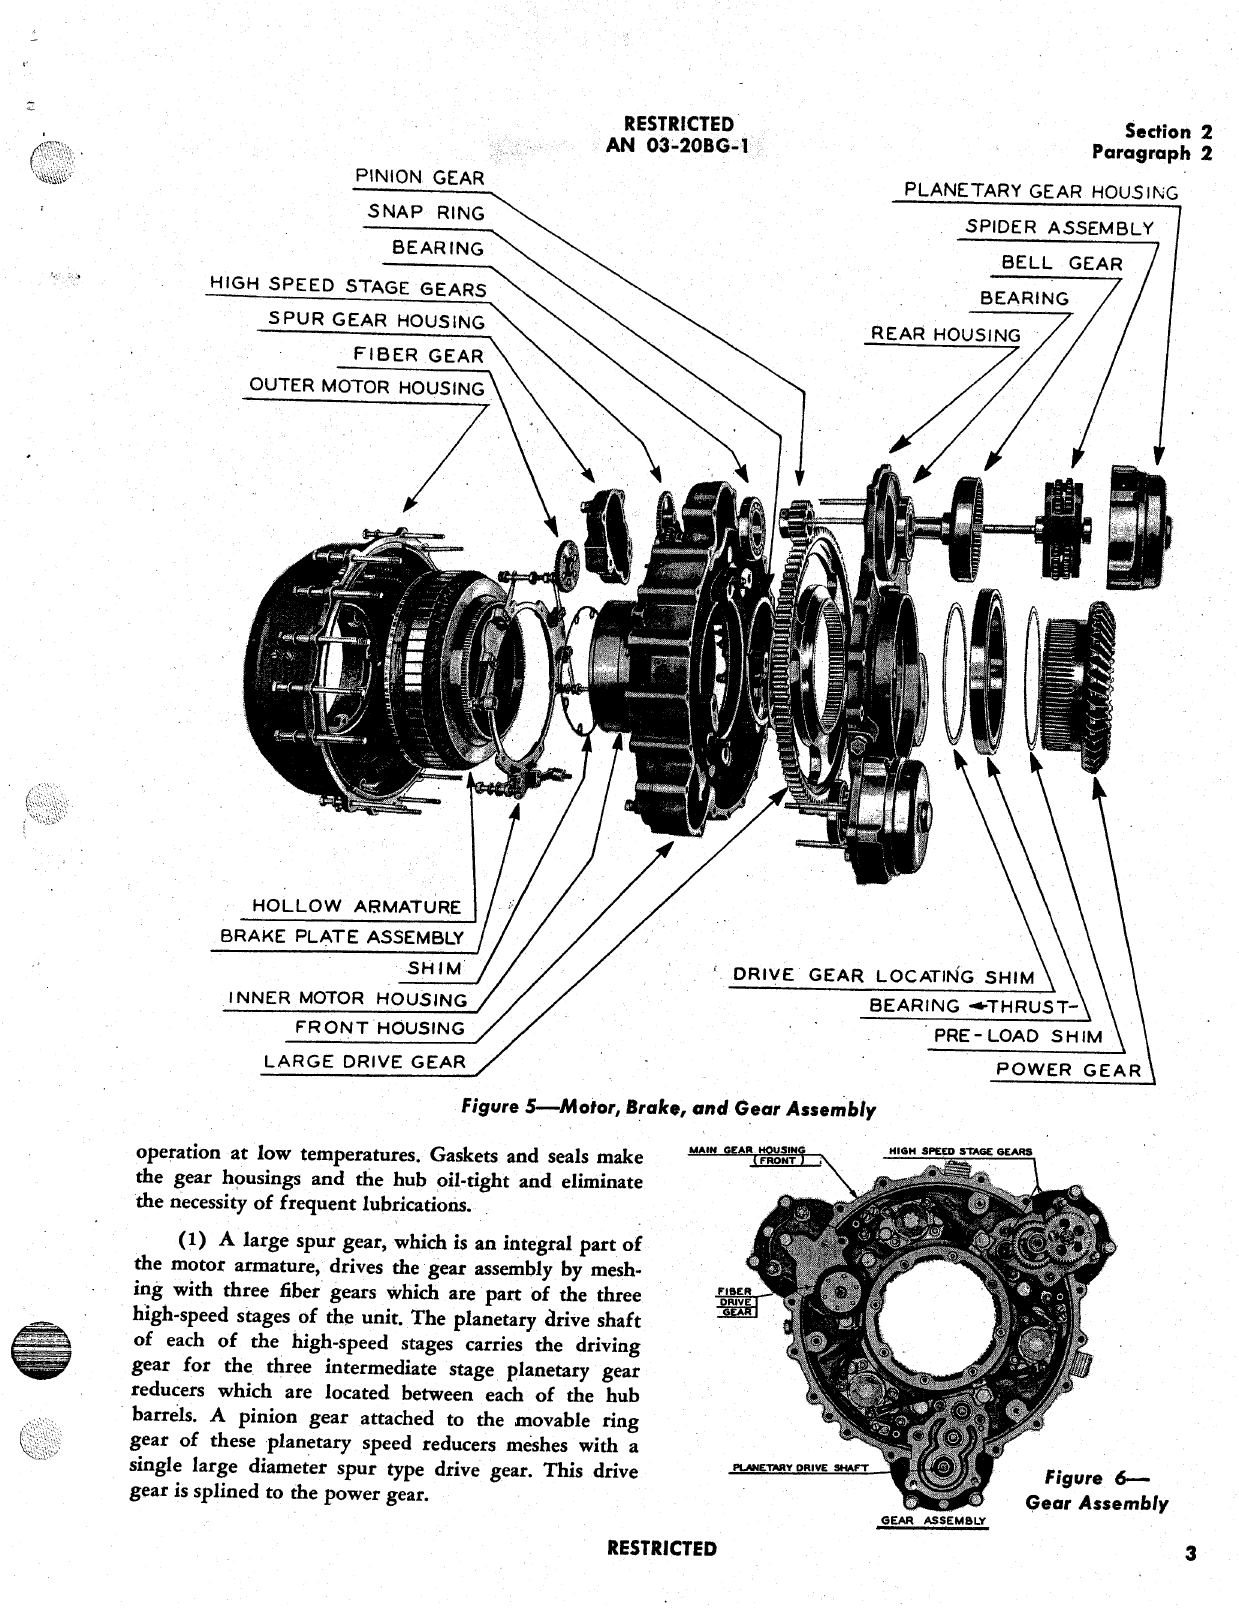 Sample page 7 from AirCorps Library document: Handbook of Instructions with Parts Catalog for Hollow Shaft (Three Blade) Propeller Model C6315SH